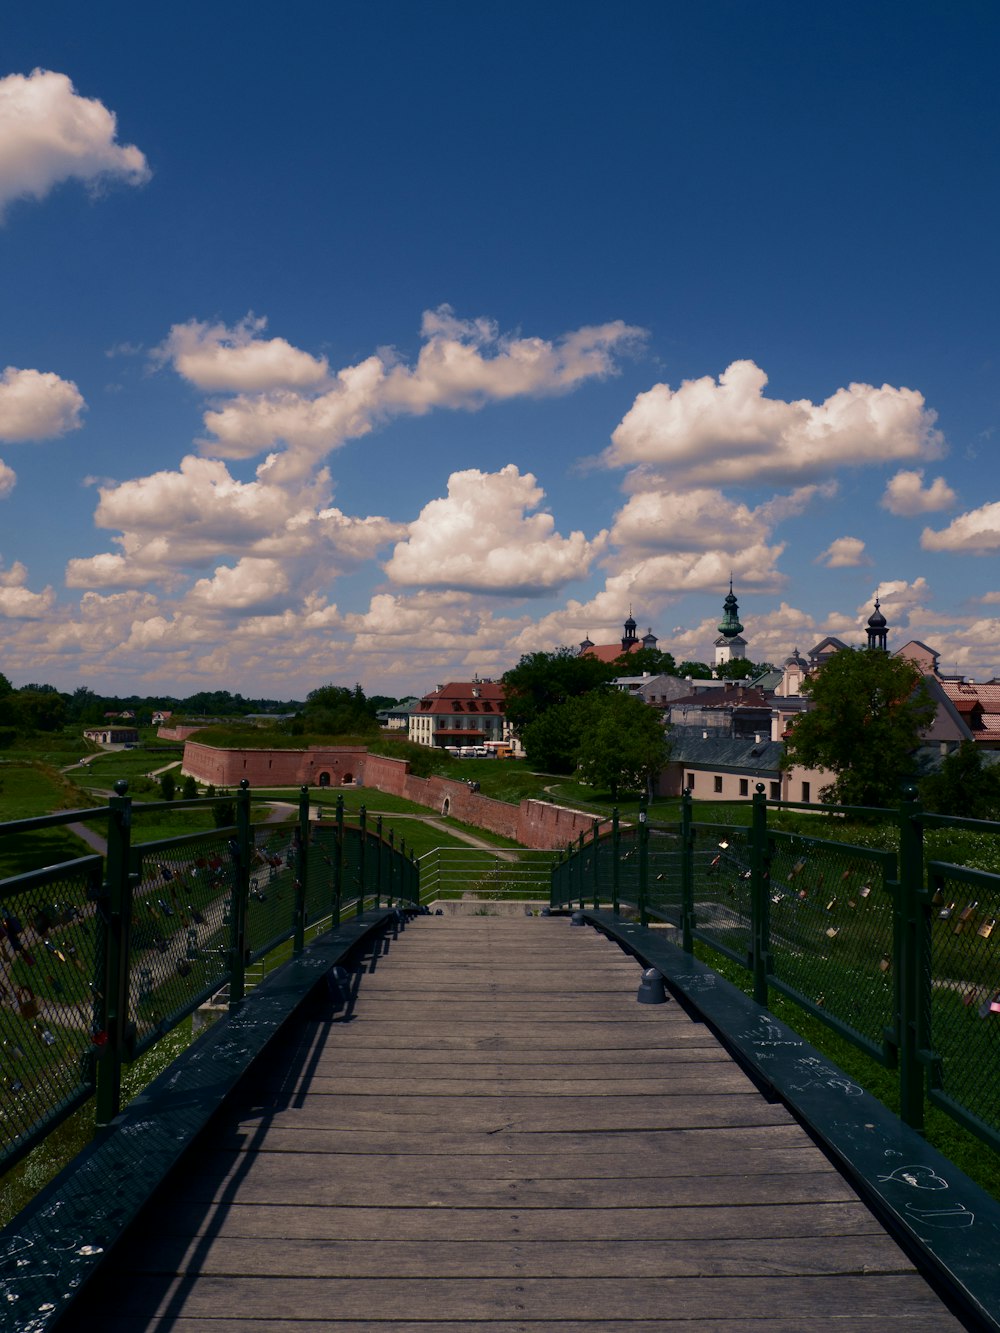 brown wooden bridge over green grass field under blue sky and white clouds during daytime